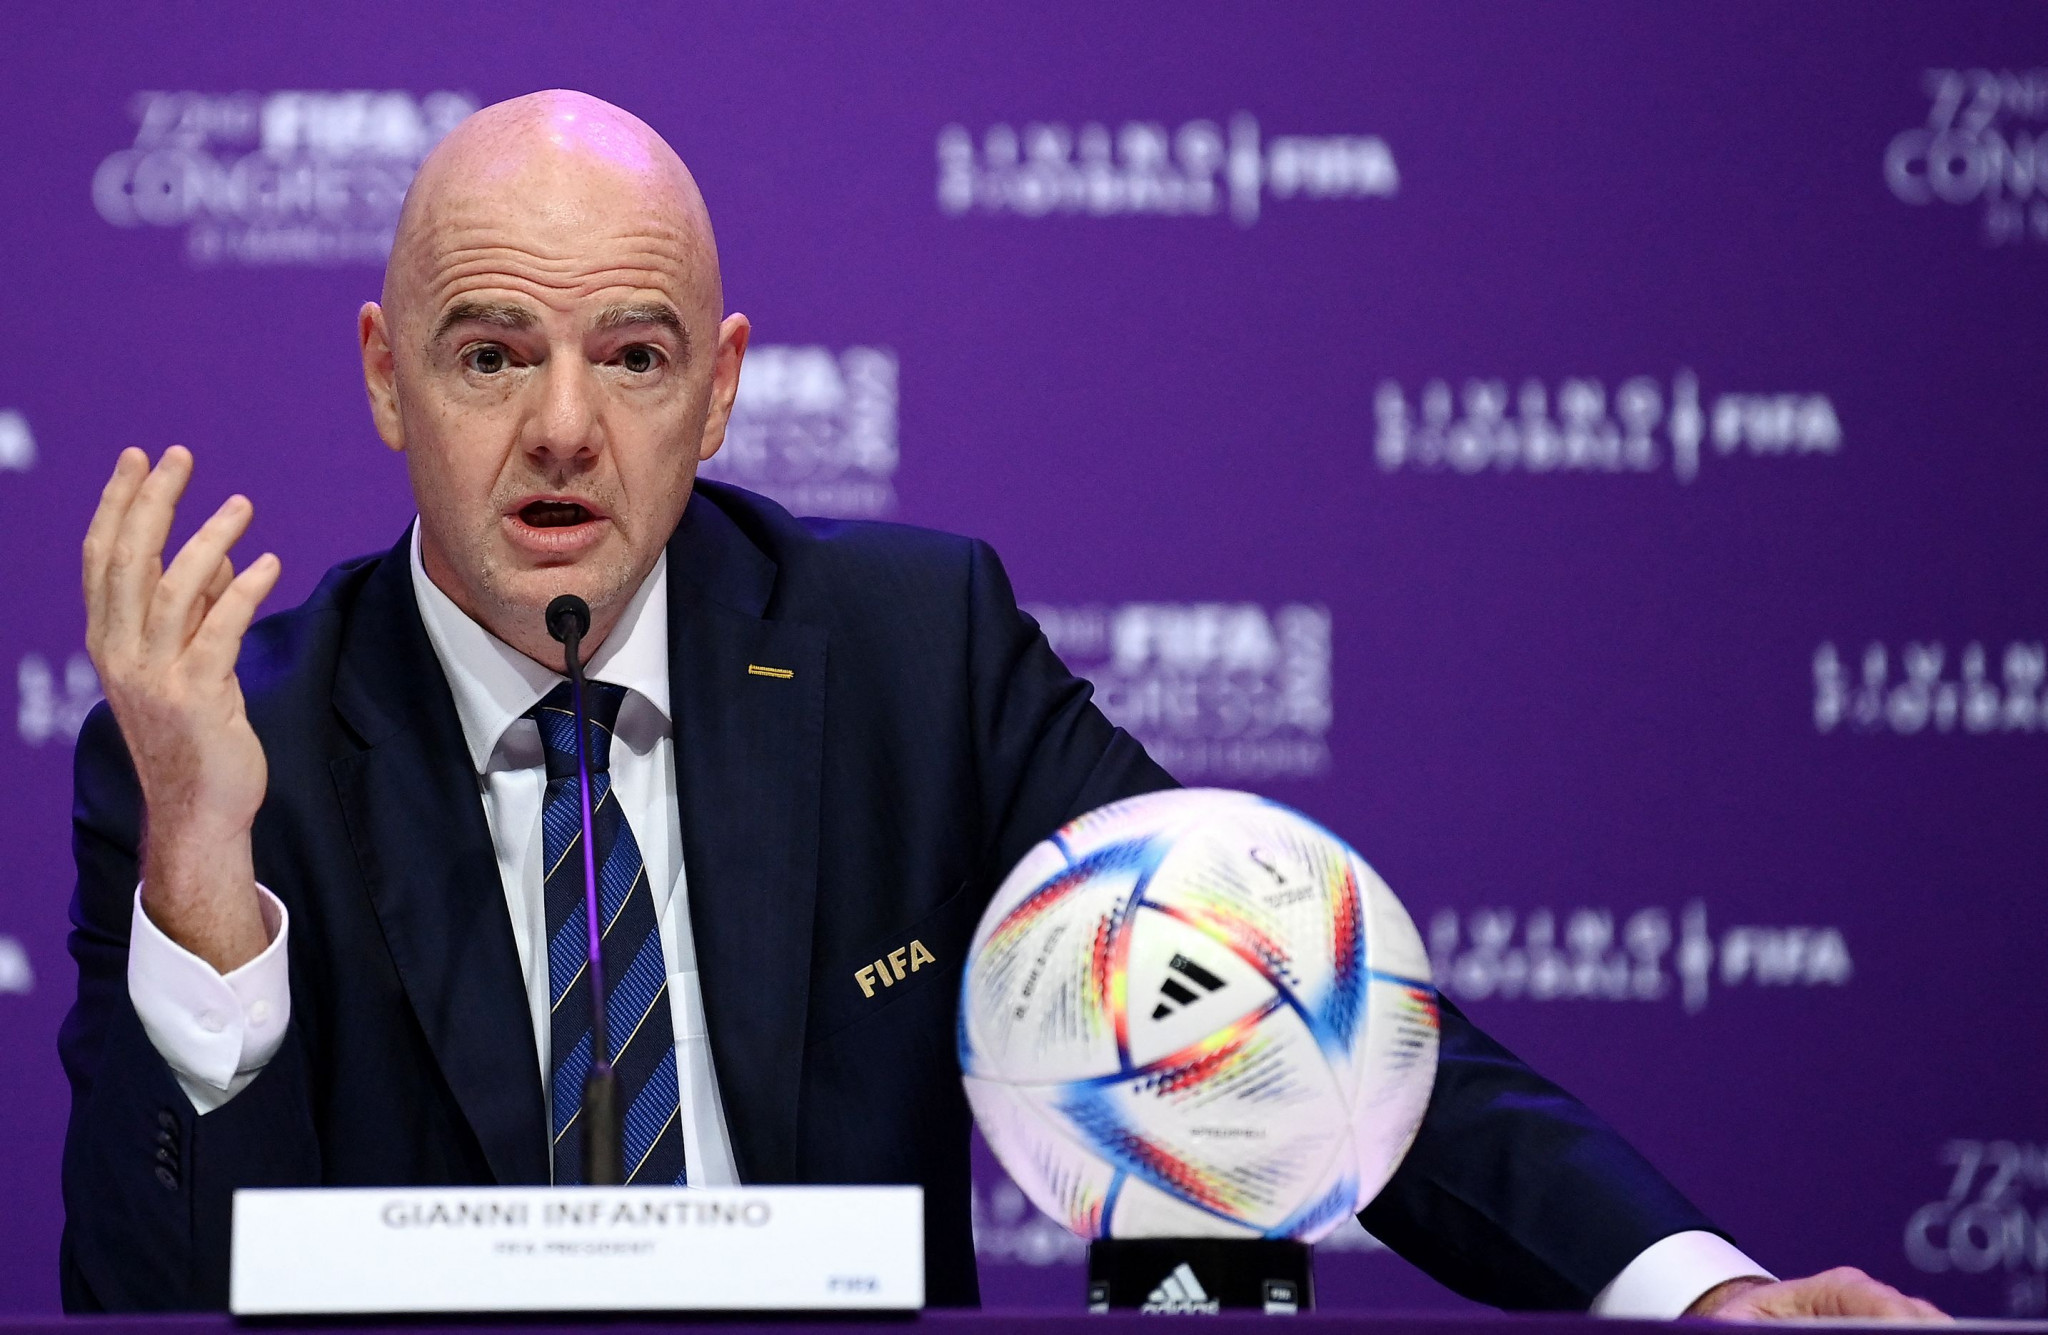 Infantino said at the press conference following the conclusion of the Congress that the meeting offered an opportunity 